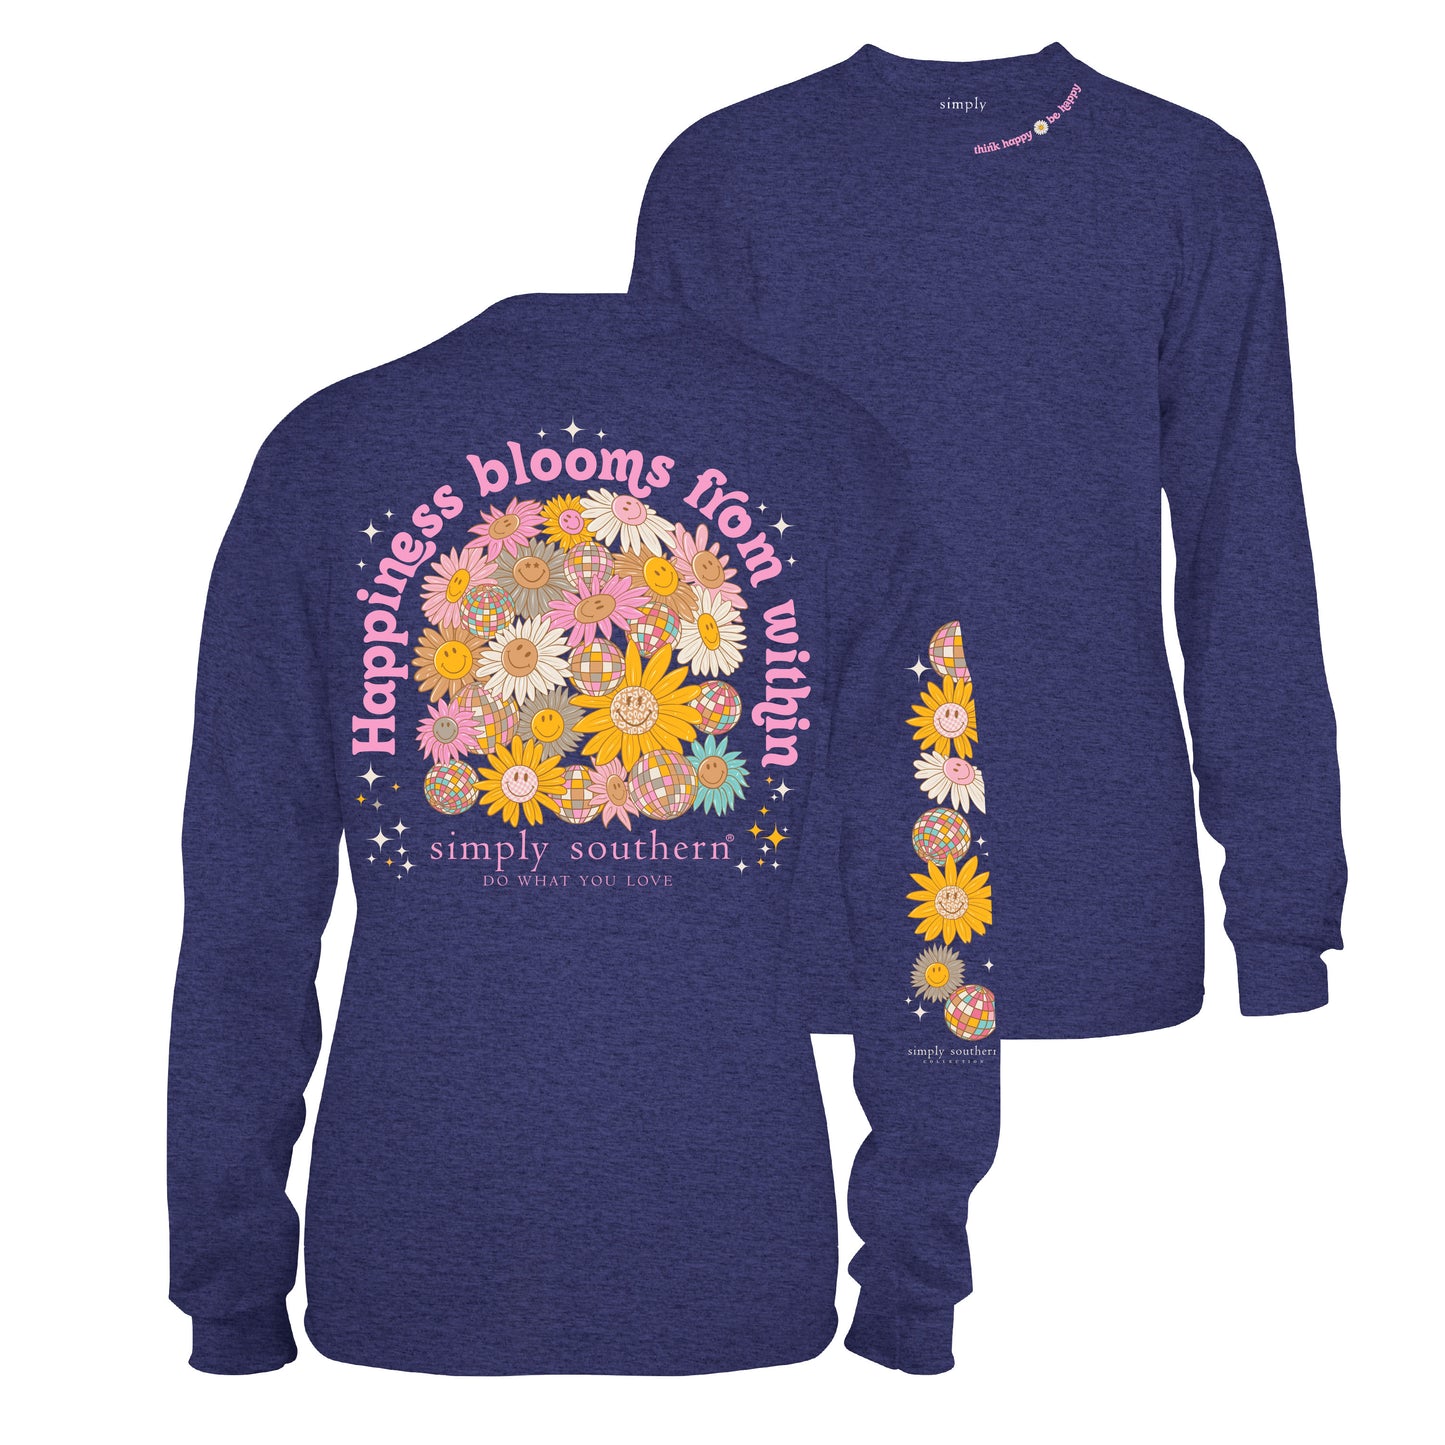 Simply Southern Happiness Blooms From Within L/S Denim Heather